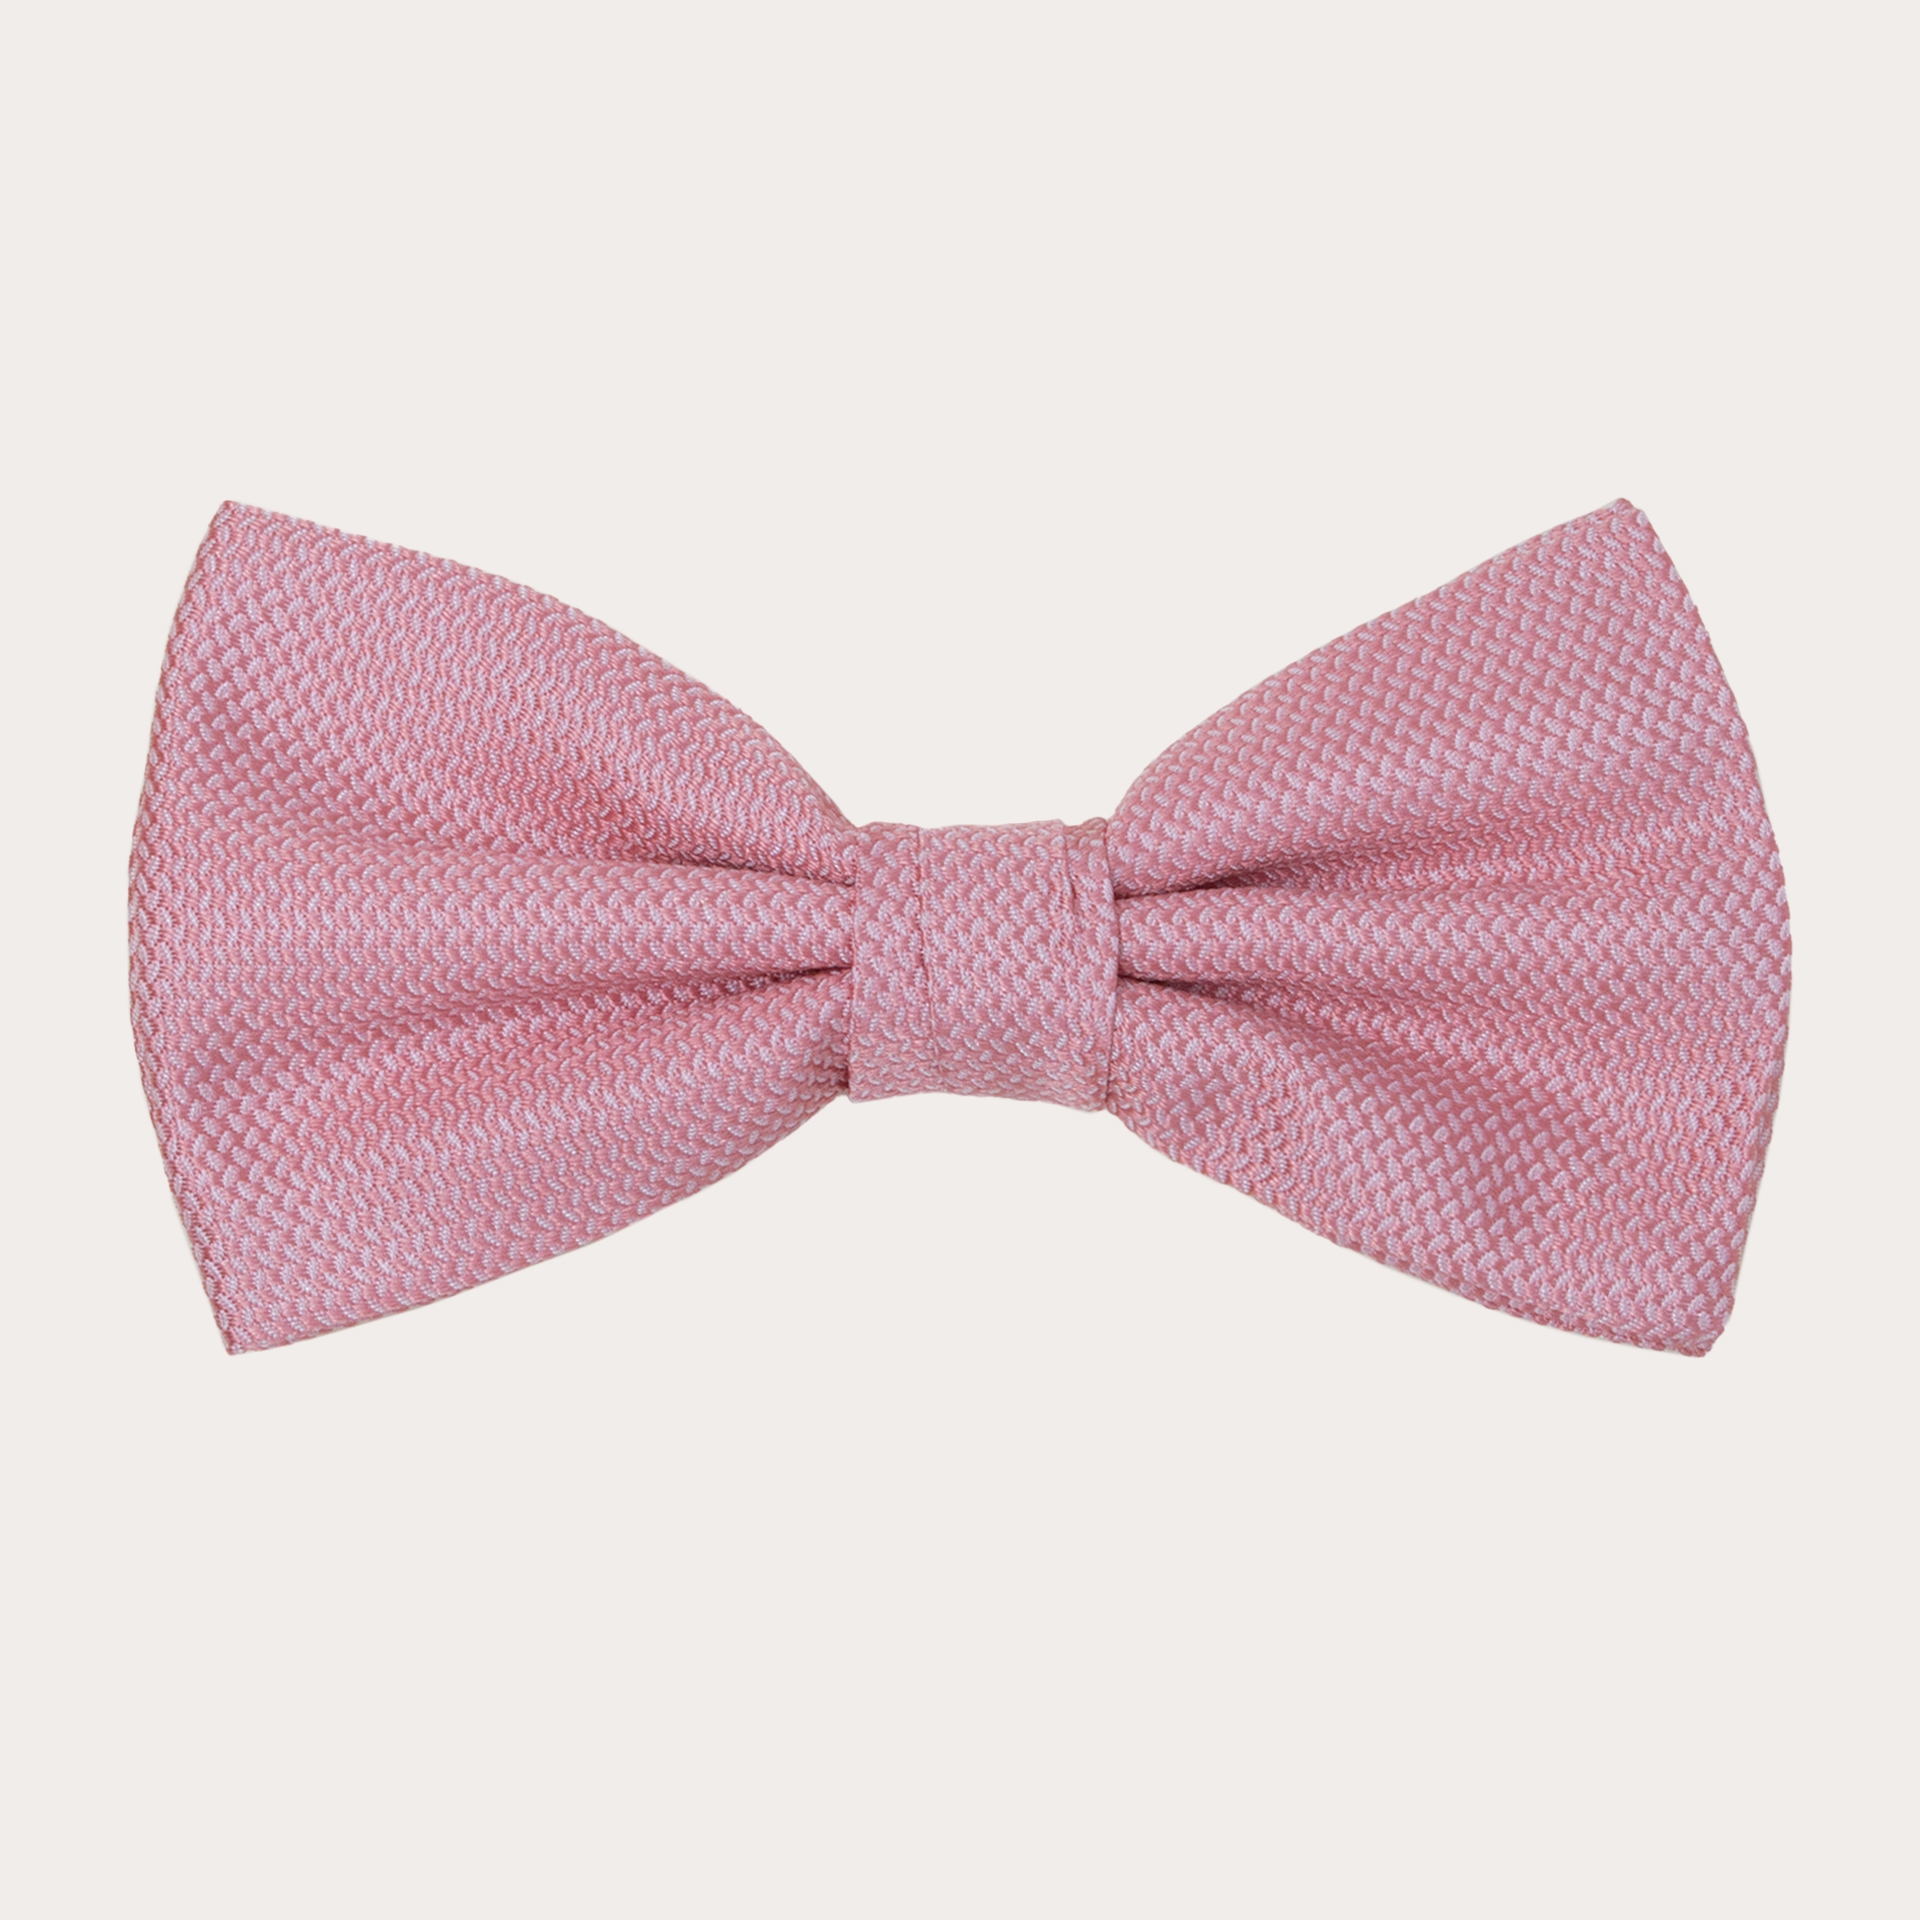 Brucle Silk Pre-tied Bow Tie pink made in italy